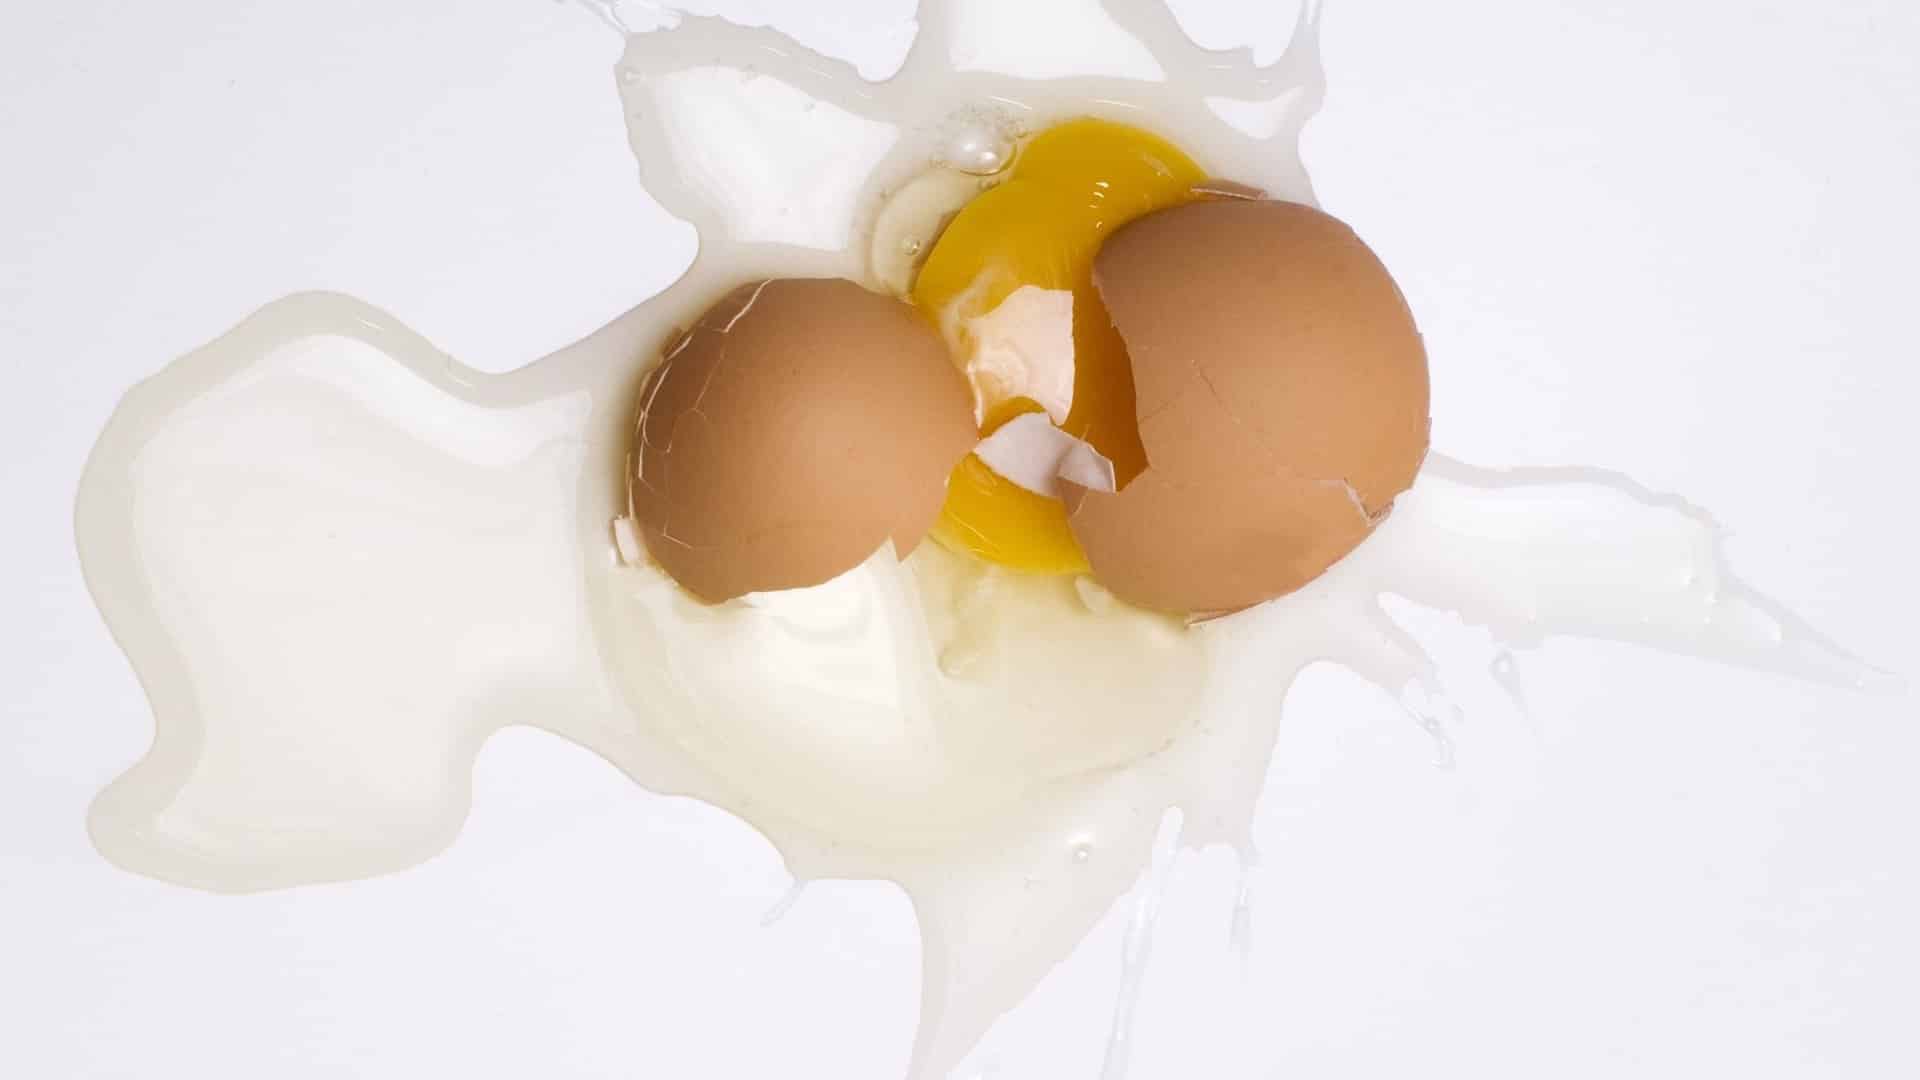 How the Egg Board Designs Misleading Studies